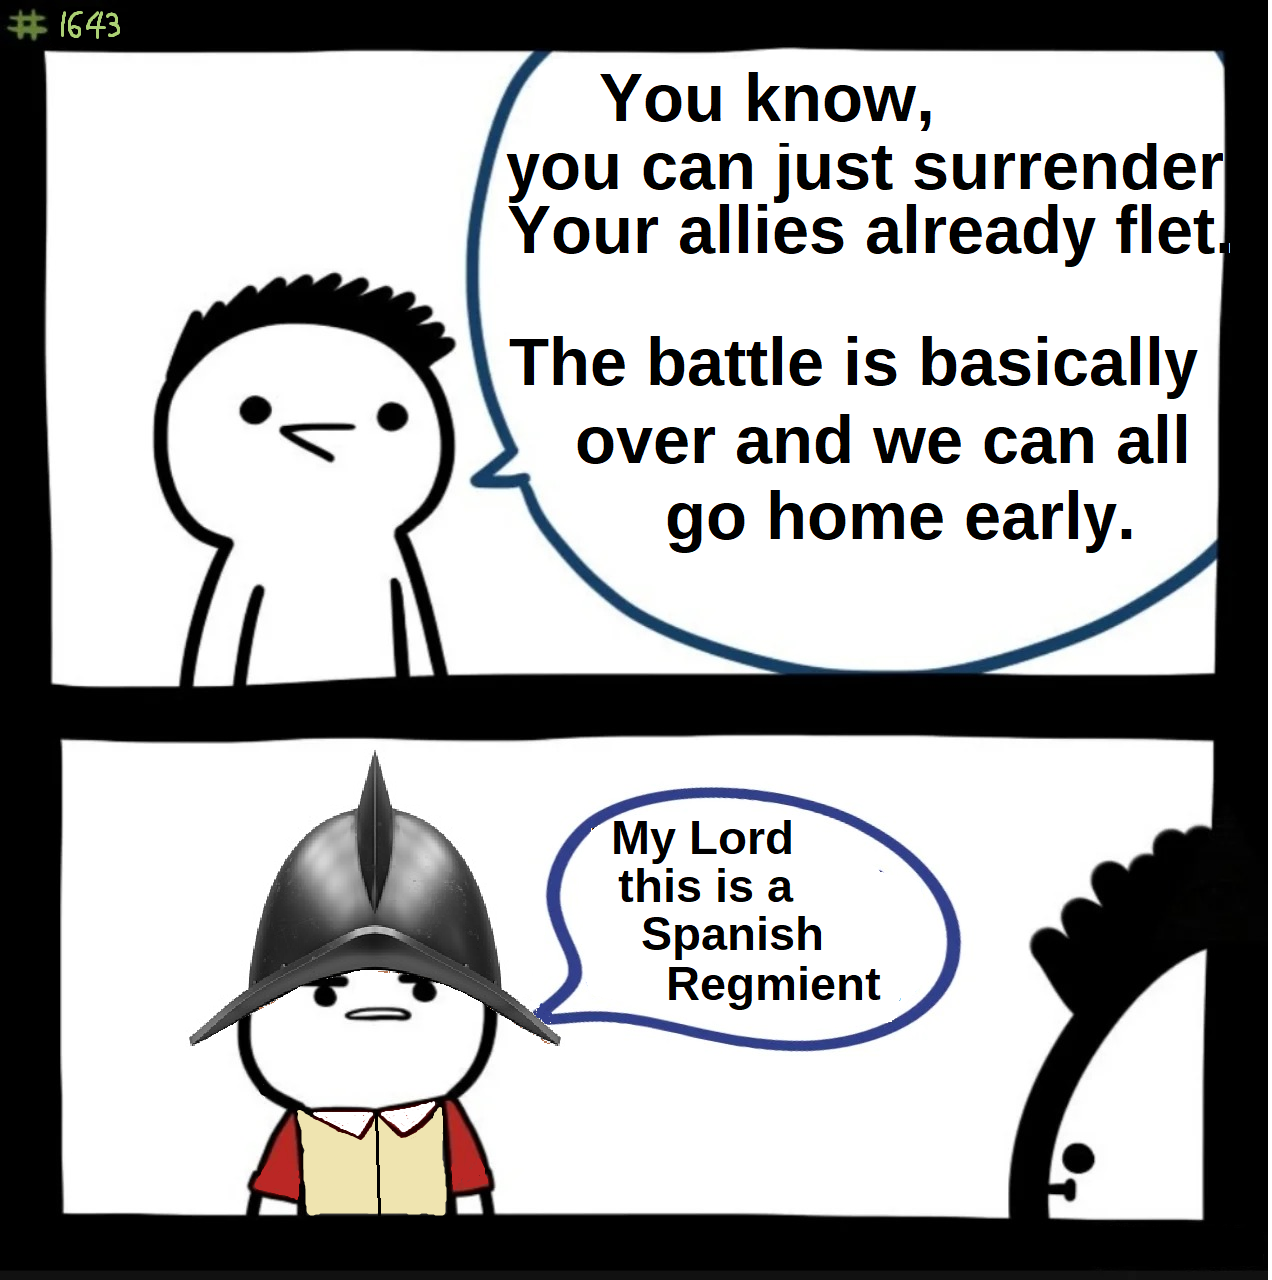 The French asking for a surrender ...